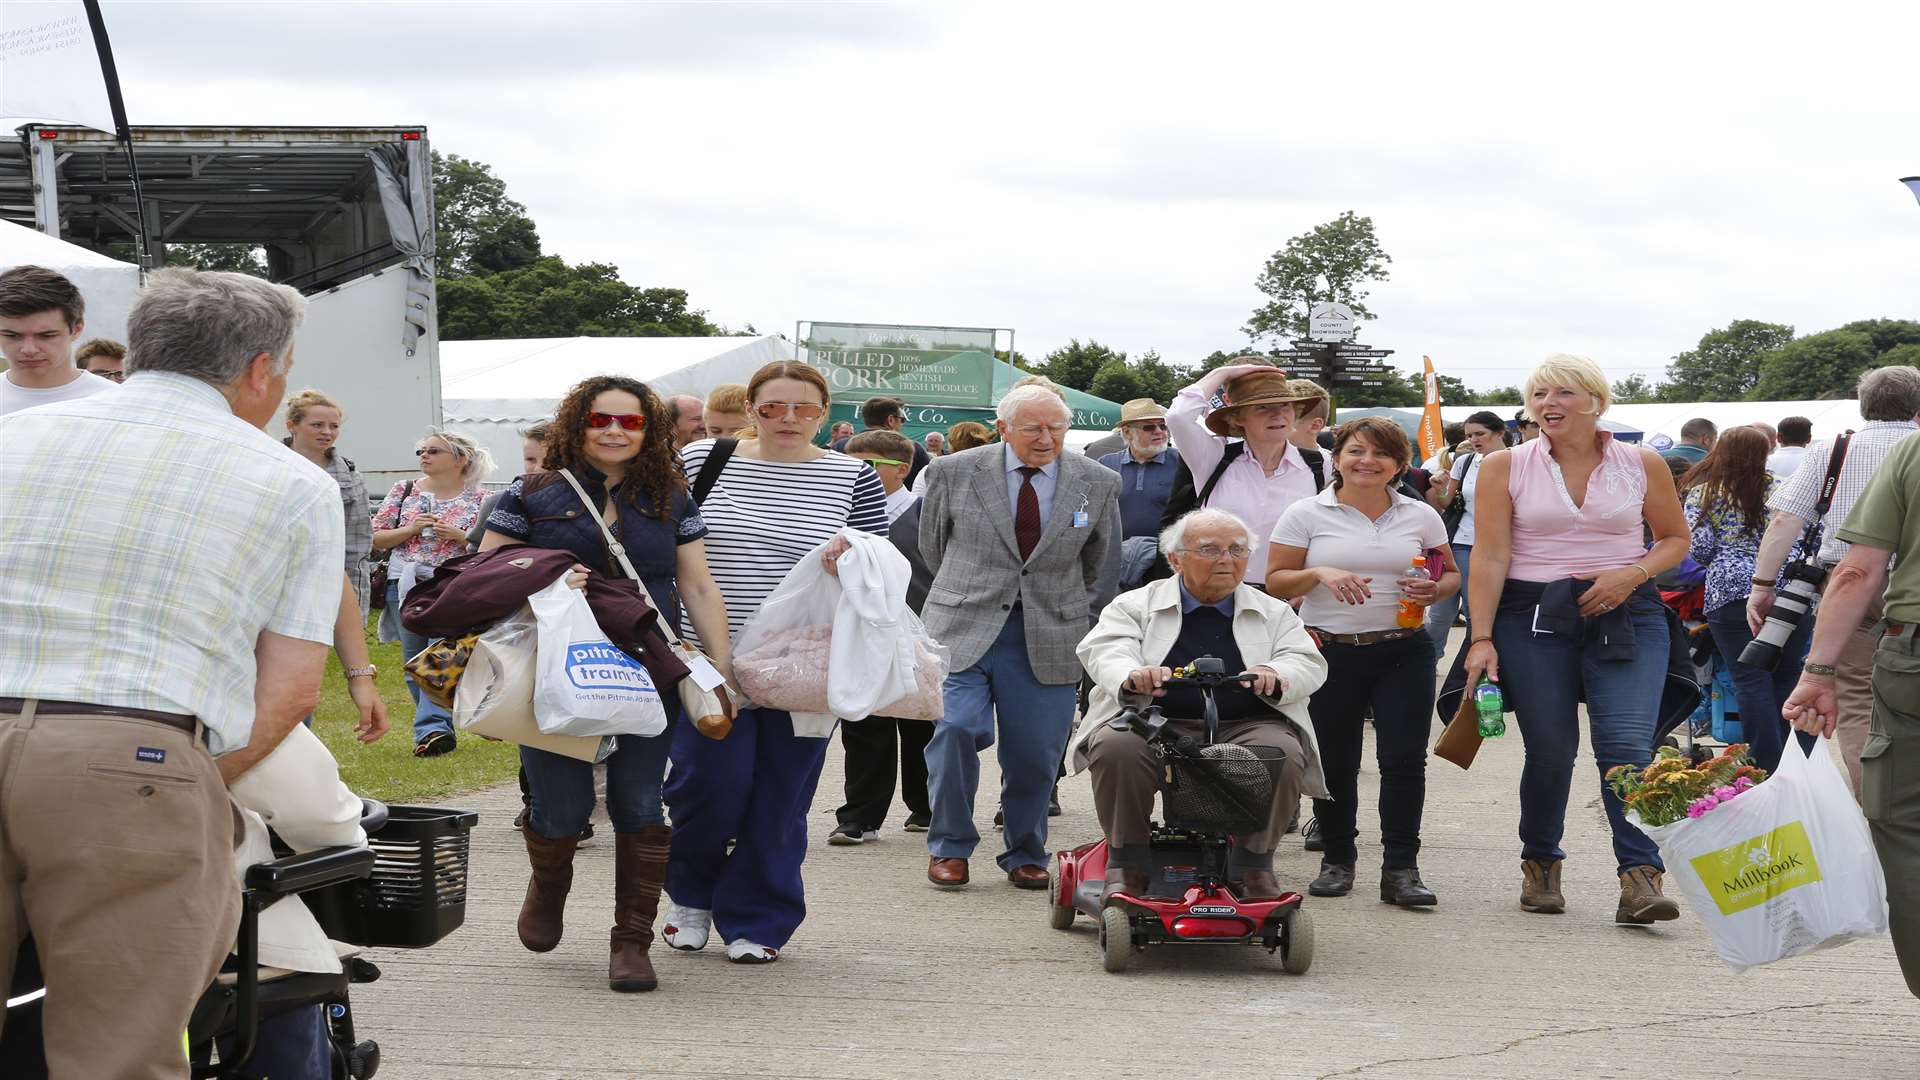 Crowds have flocked to the county showground in Detling